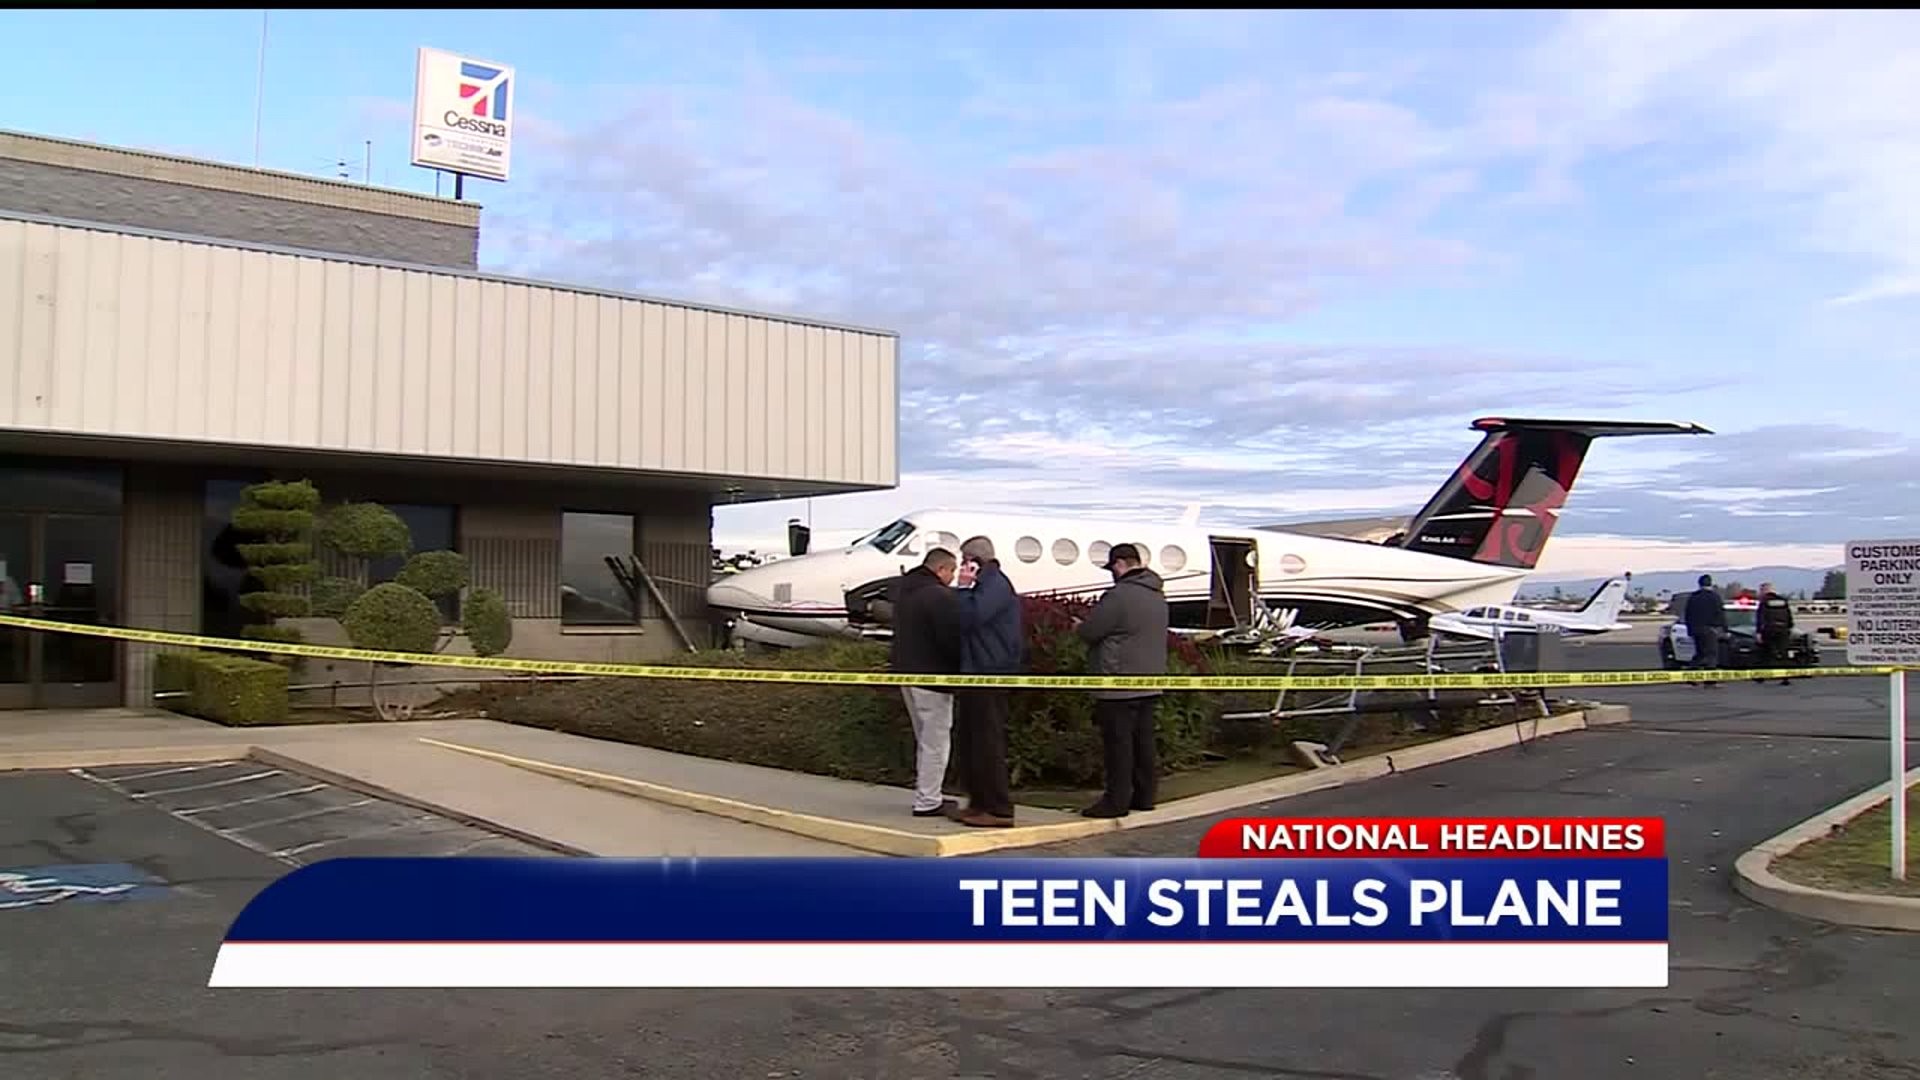 Teen girl sneaks into small plane, drives it into fence